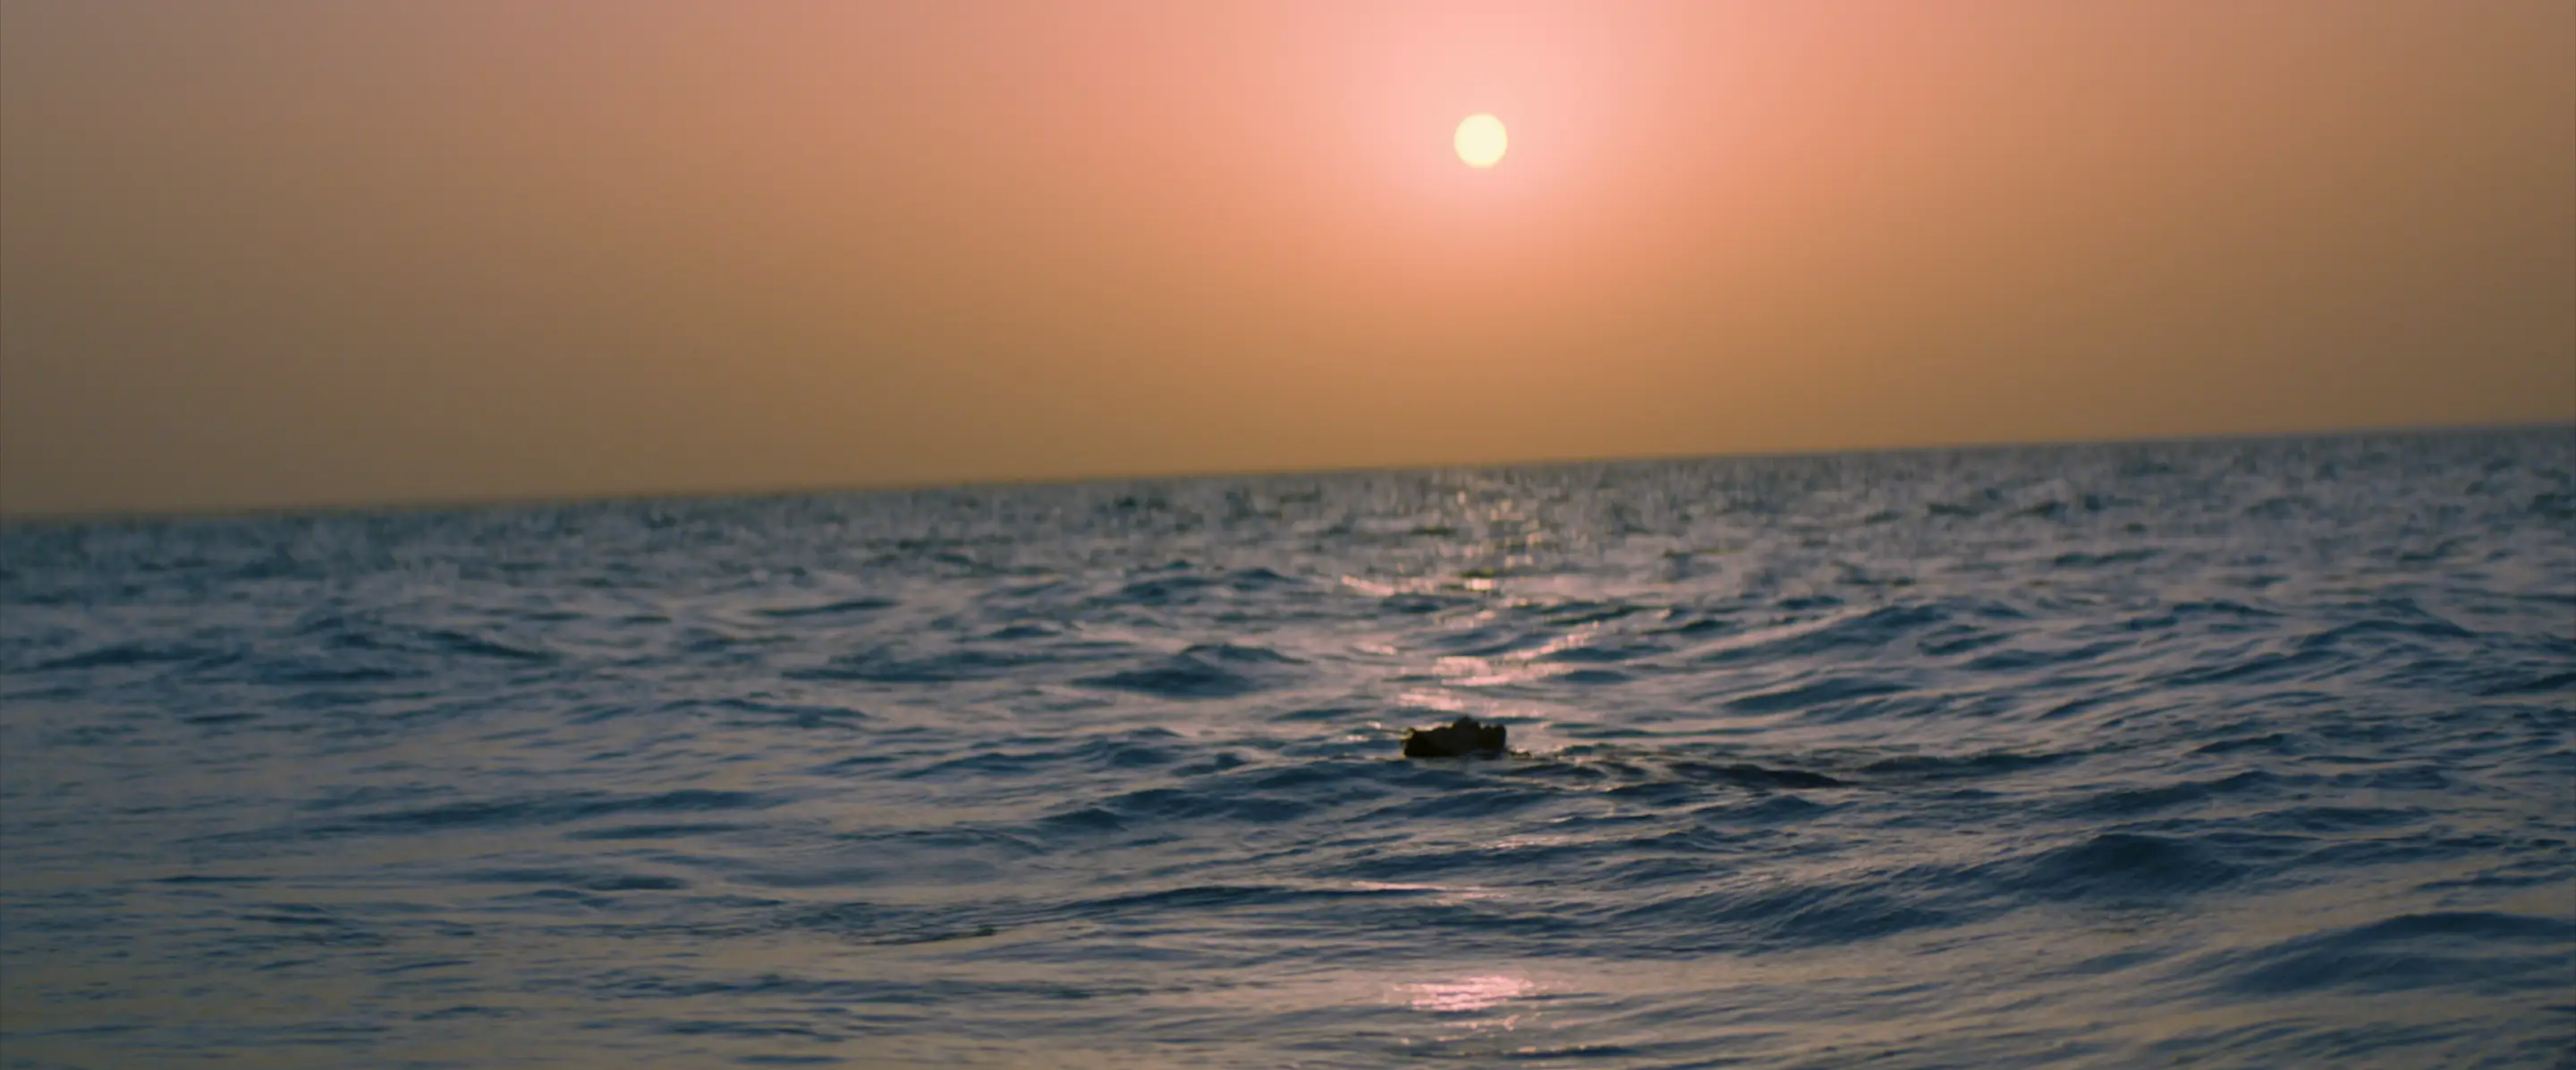 Ocean, Island and Silhouettes in Lavish Film by M&C Saatchi and electriclimefilms 